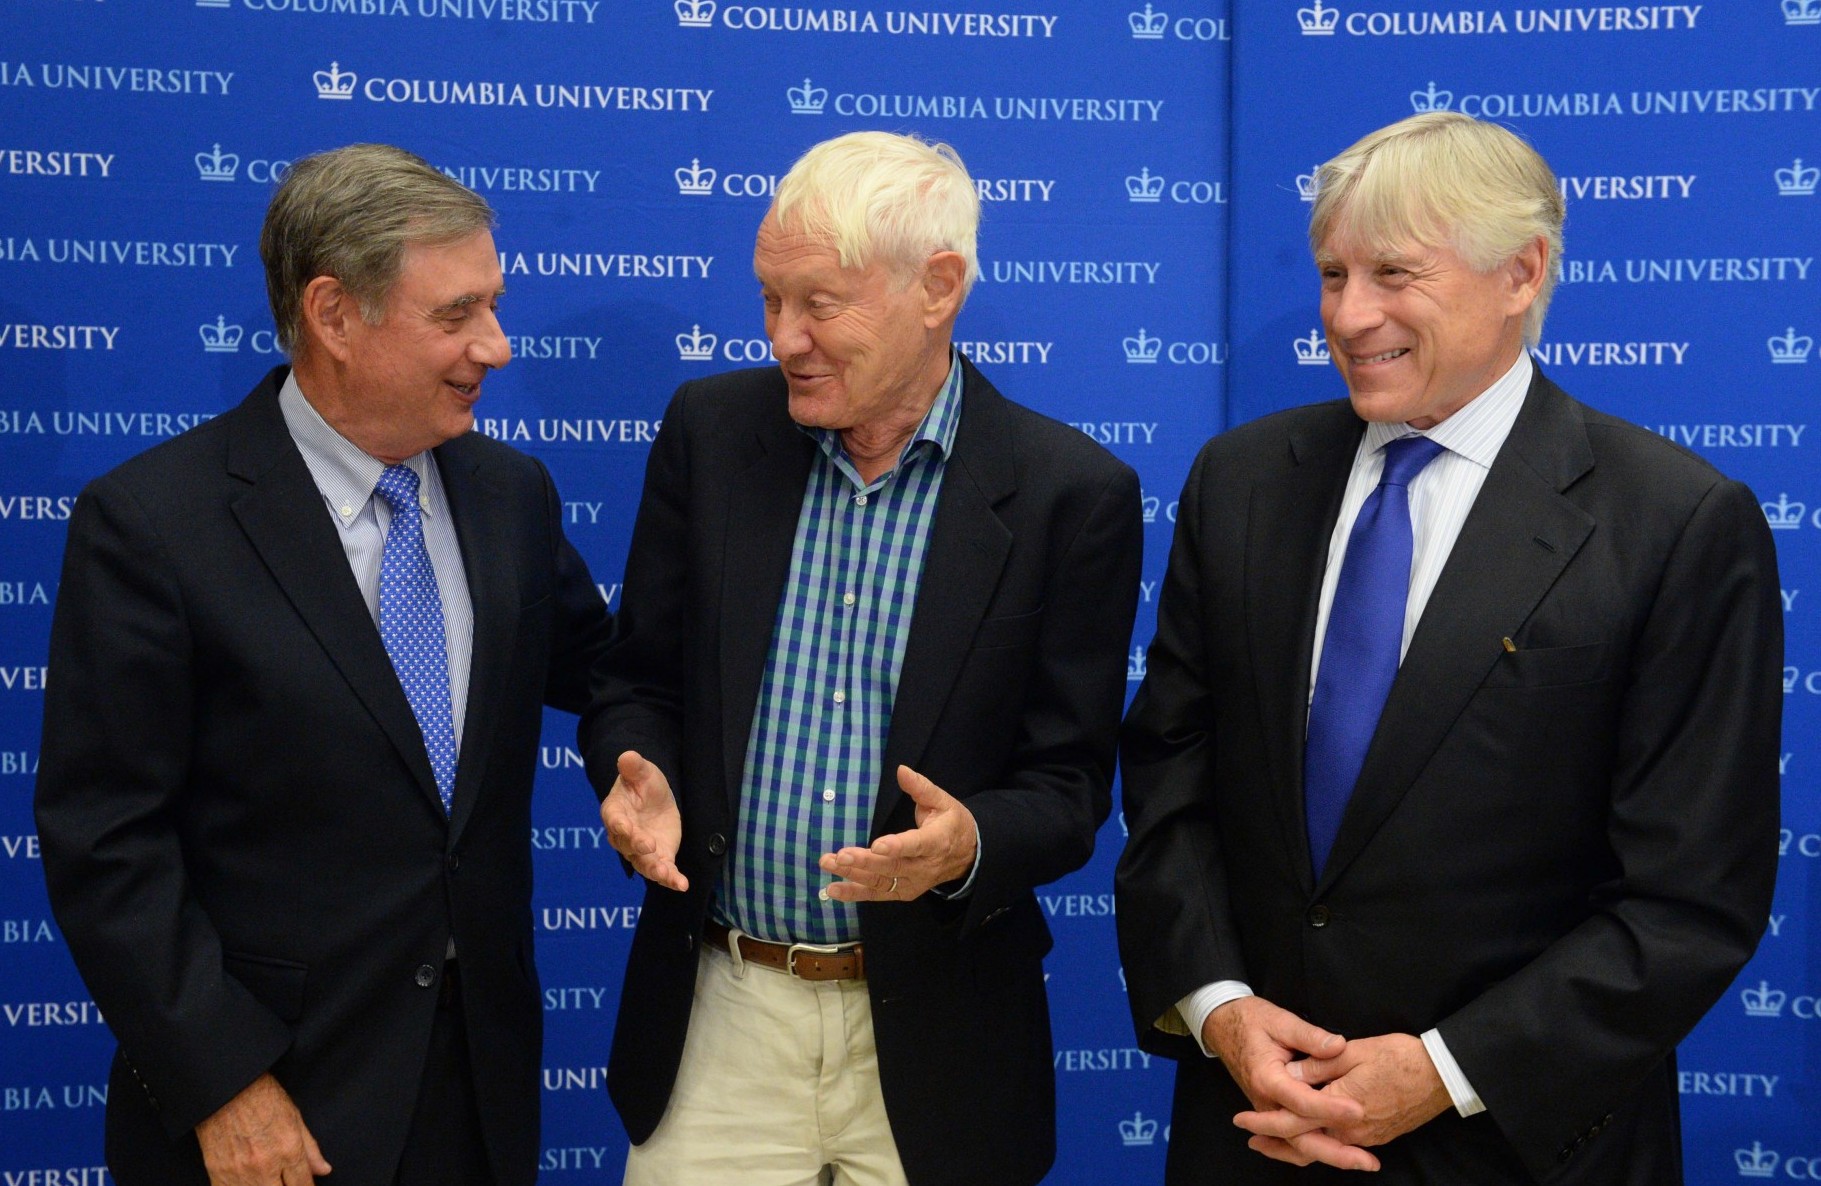 Lee Goldman, Joachim Frank and Lee Bollinger stand together after the celebration for the 2017 Nobel Prize in Chemistry is announced.